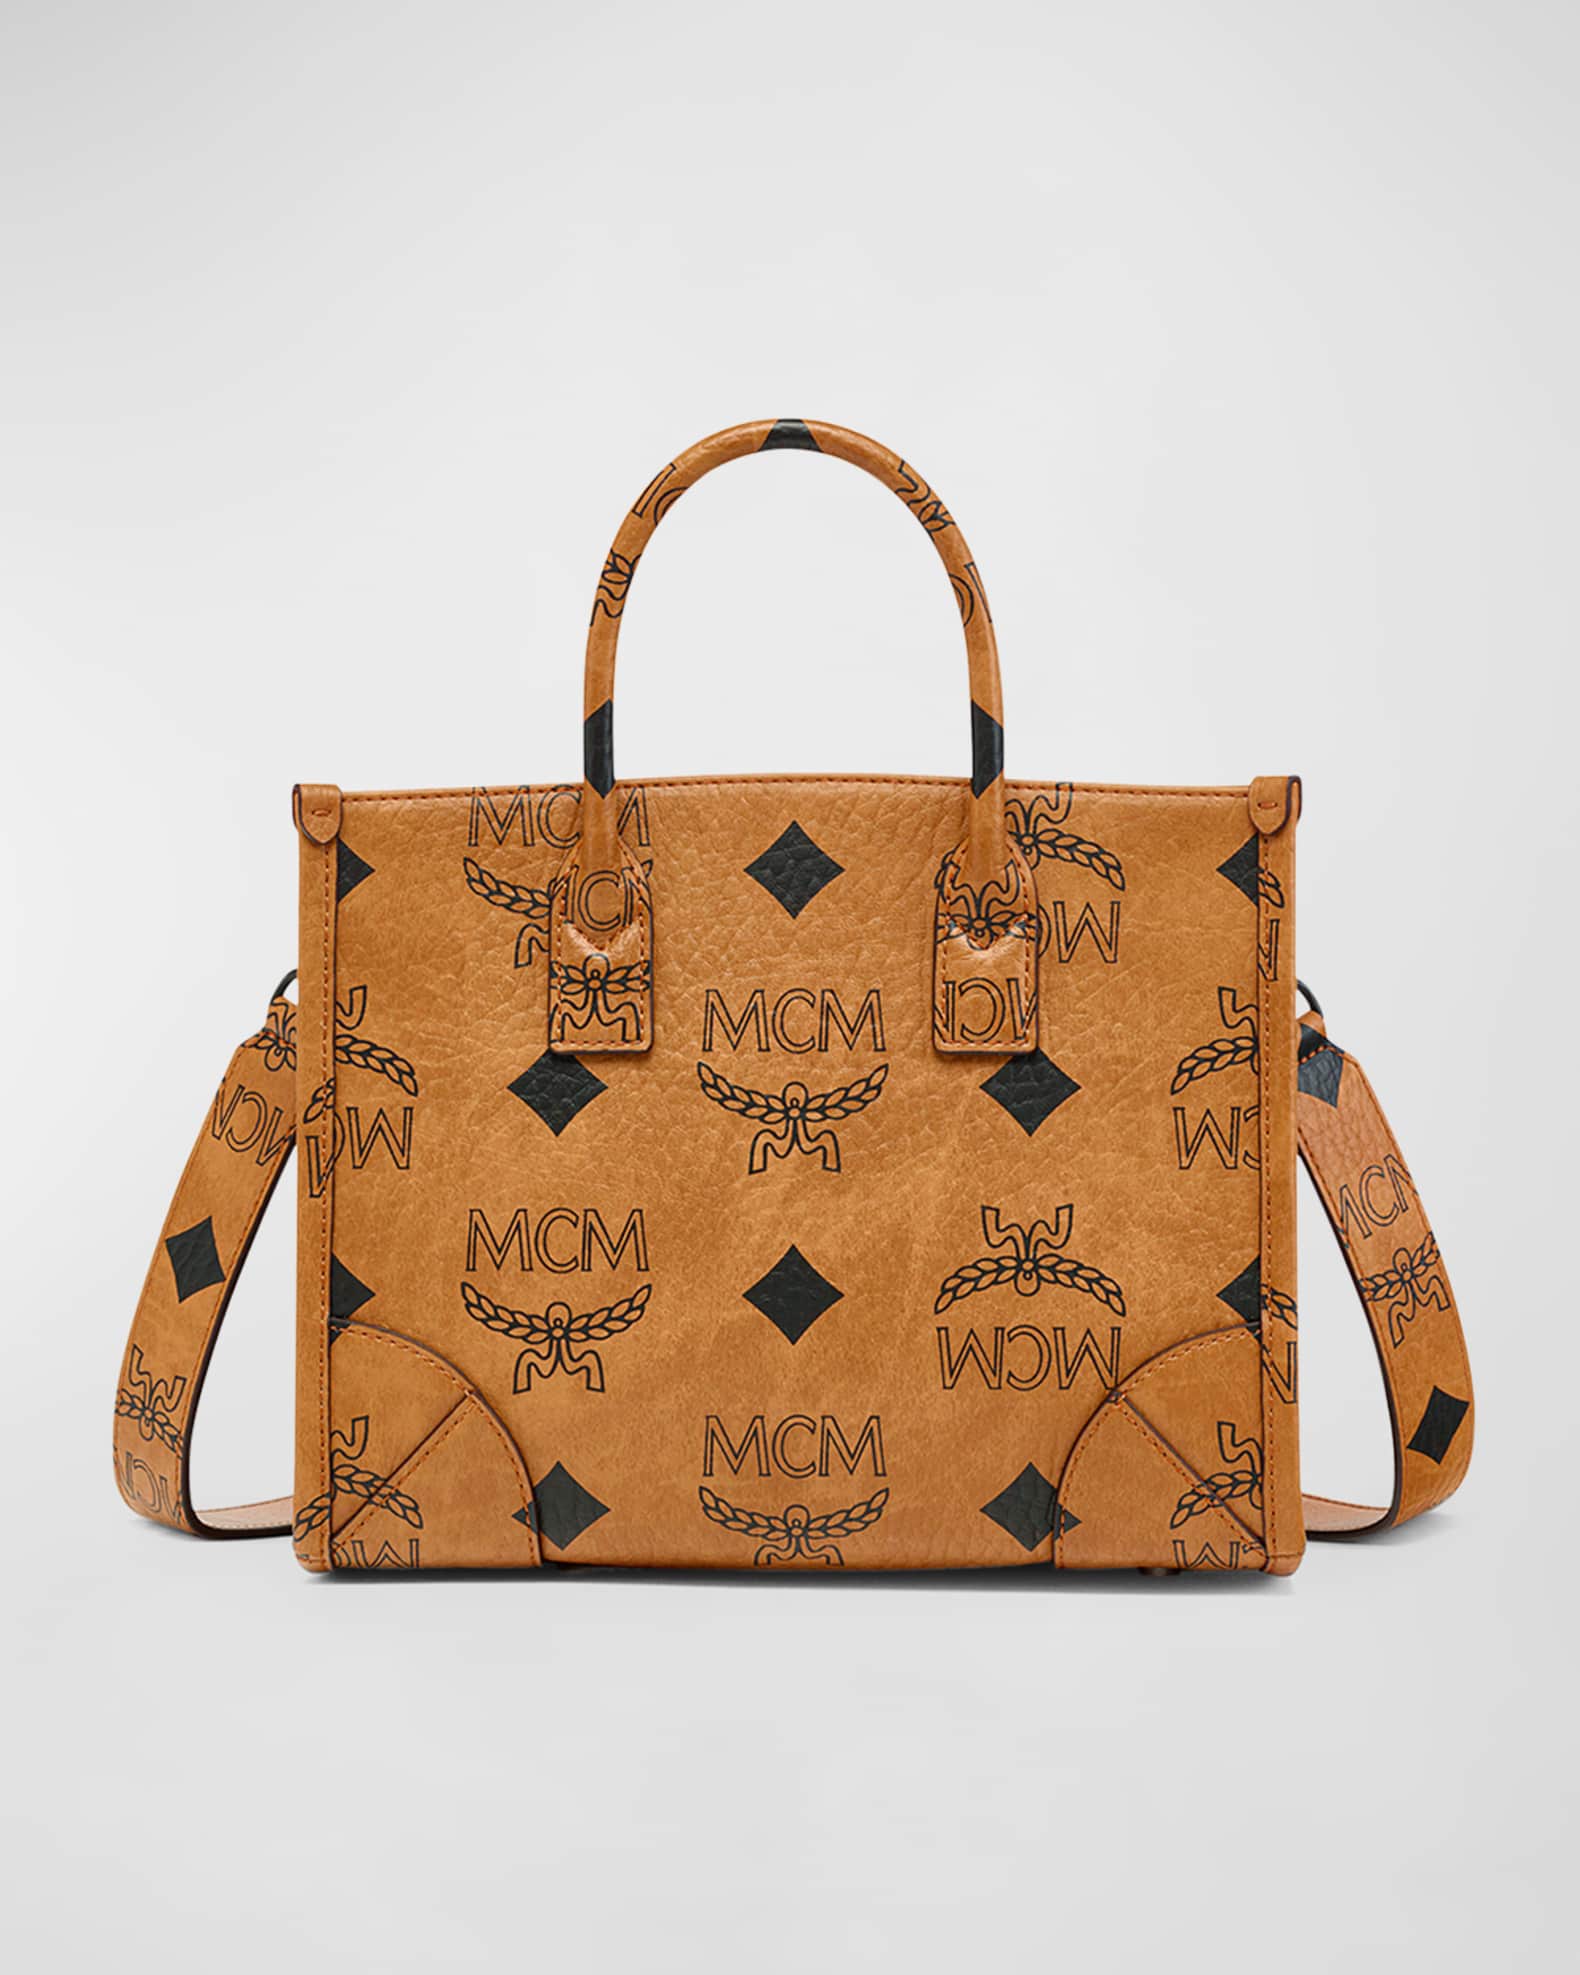 Women's Small Munchen Tote Bag by Mcm